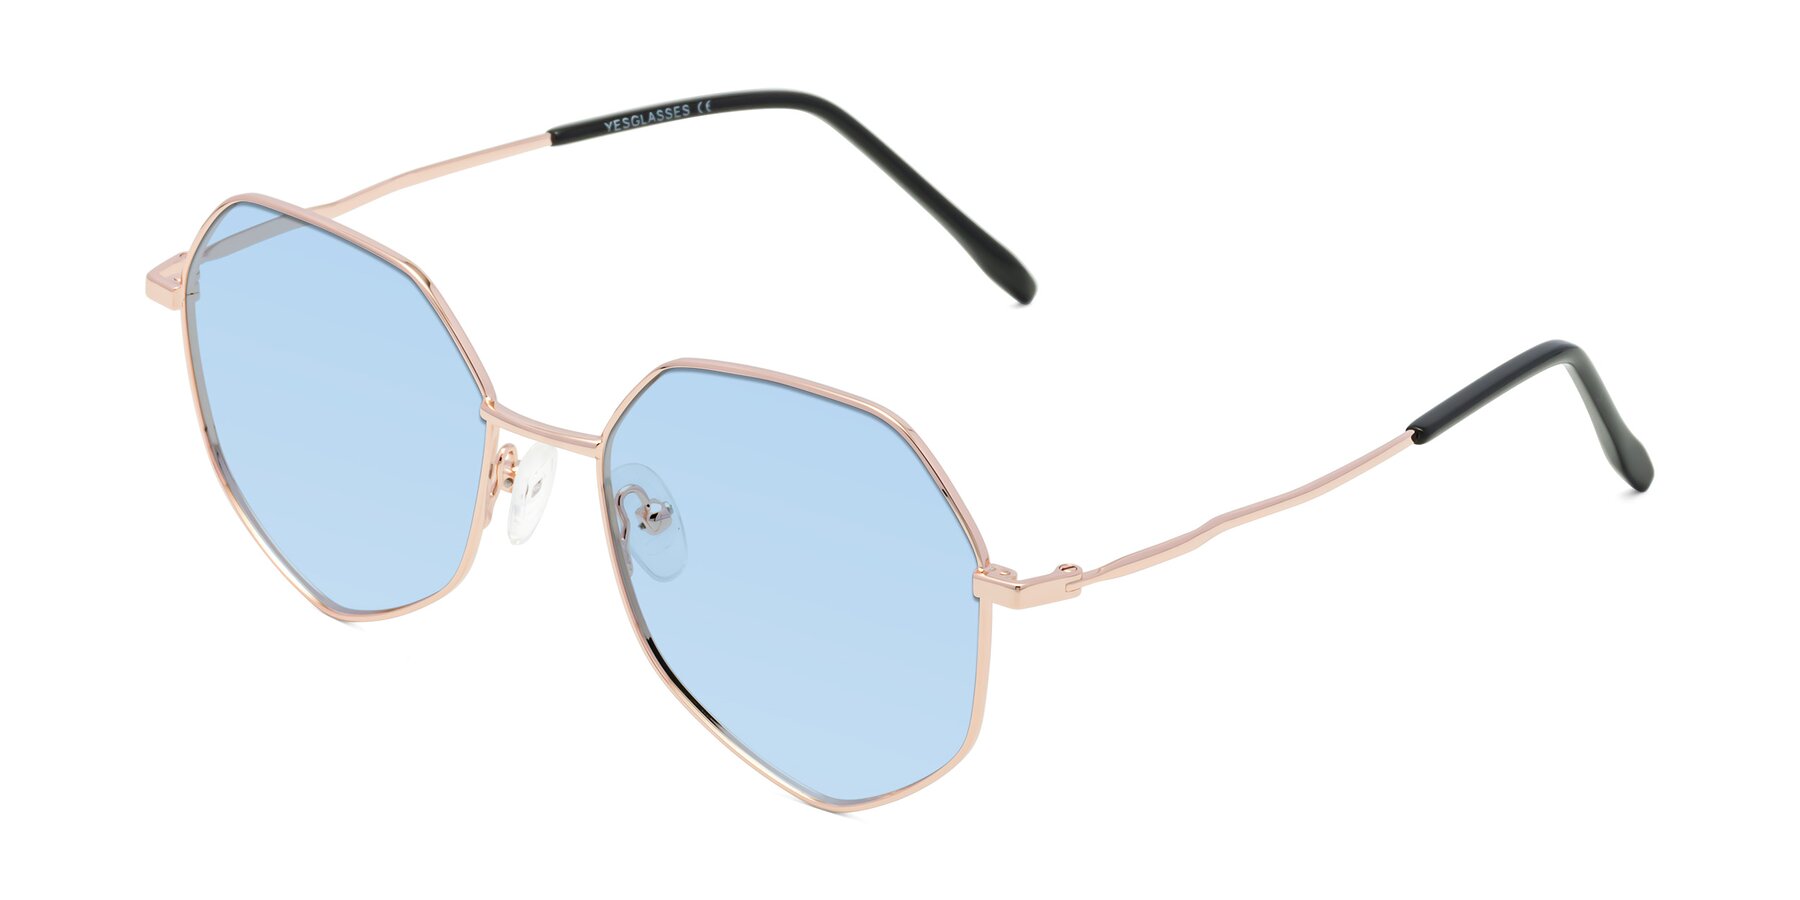 Angle of Sunshine in Rose Gold with Light Blue Tinted Lenses